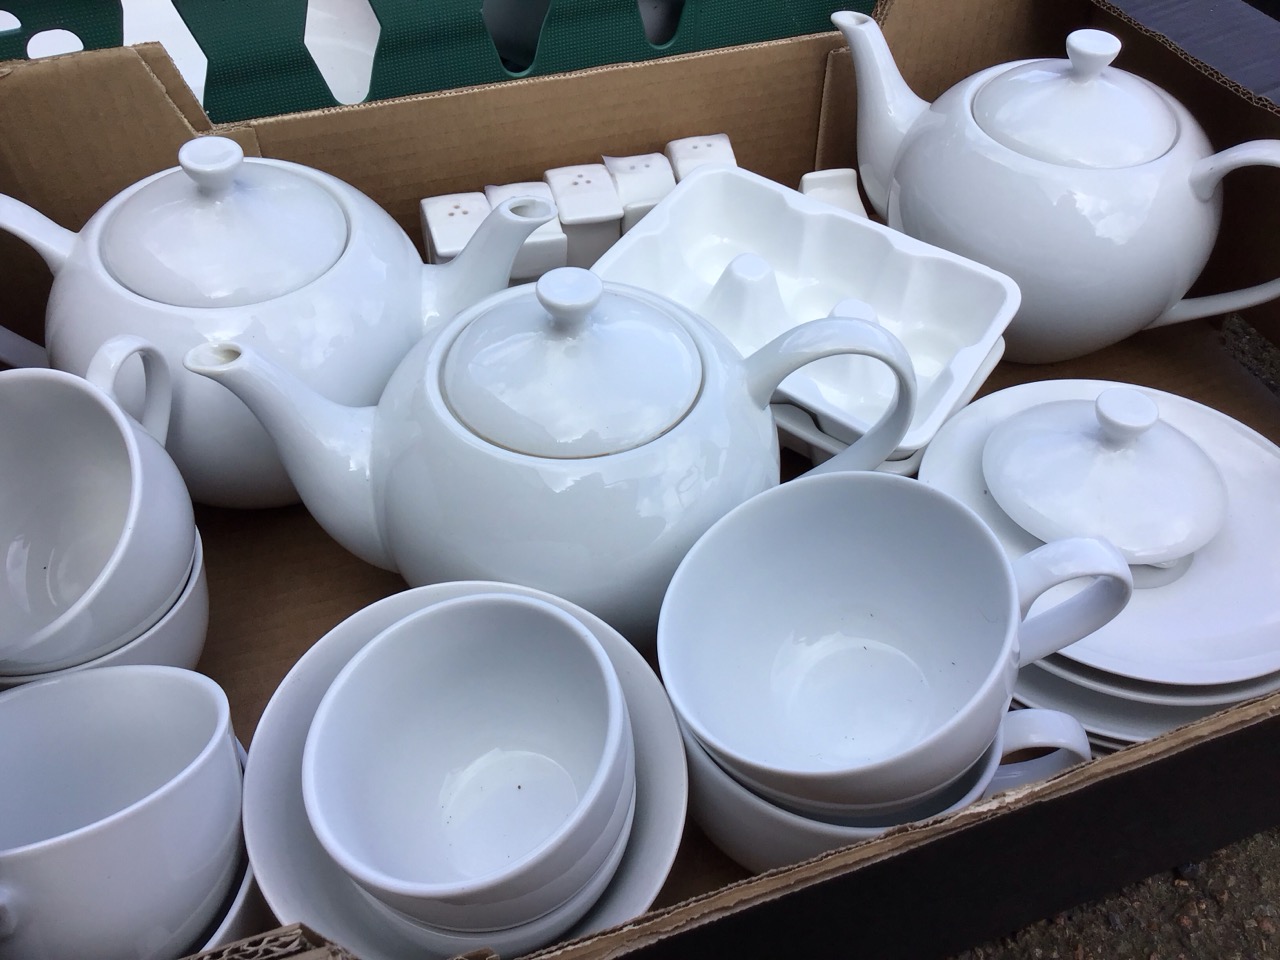 An extensive white ceramic dinner service with teapots, a coffee pot, cups & saucers, plates, bowls, - Image 2 of 3